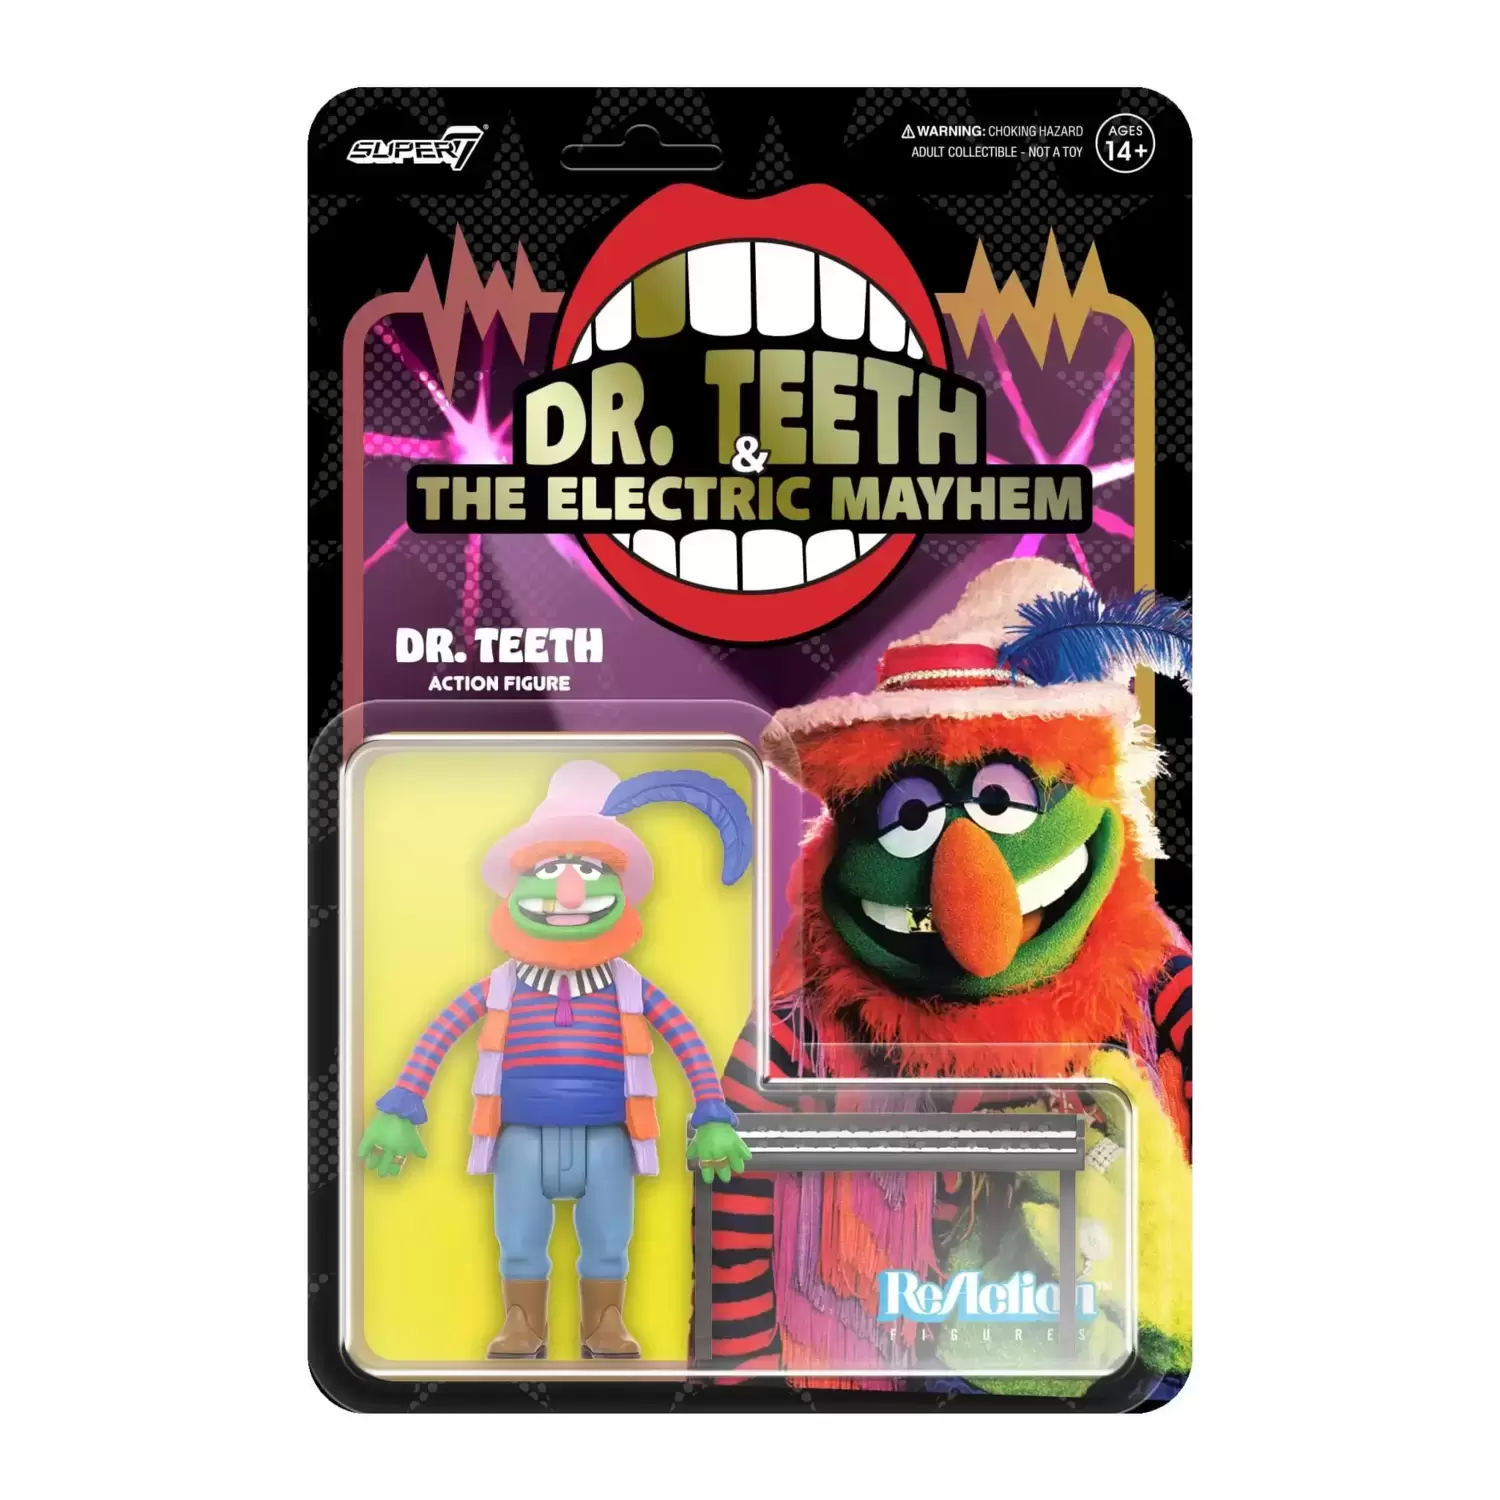 ReAction Figures - The Muppets (Dr. Teeth & The Electric Mayhem) - Dr. Teeth